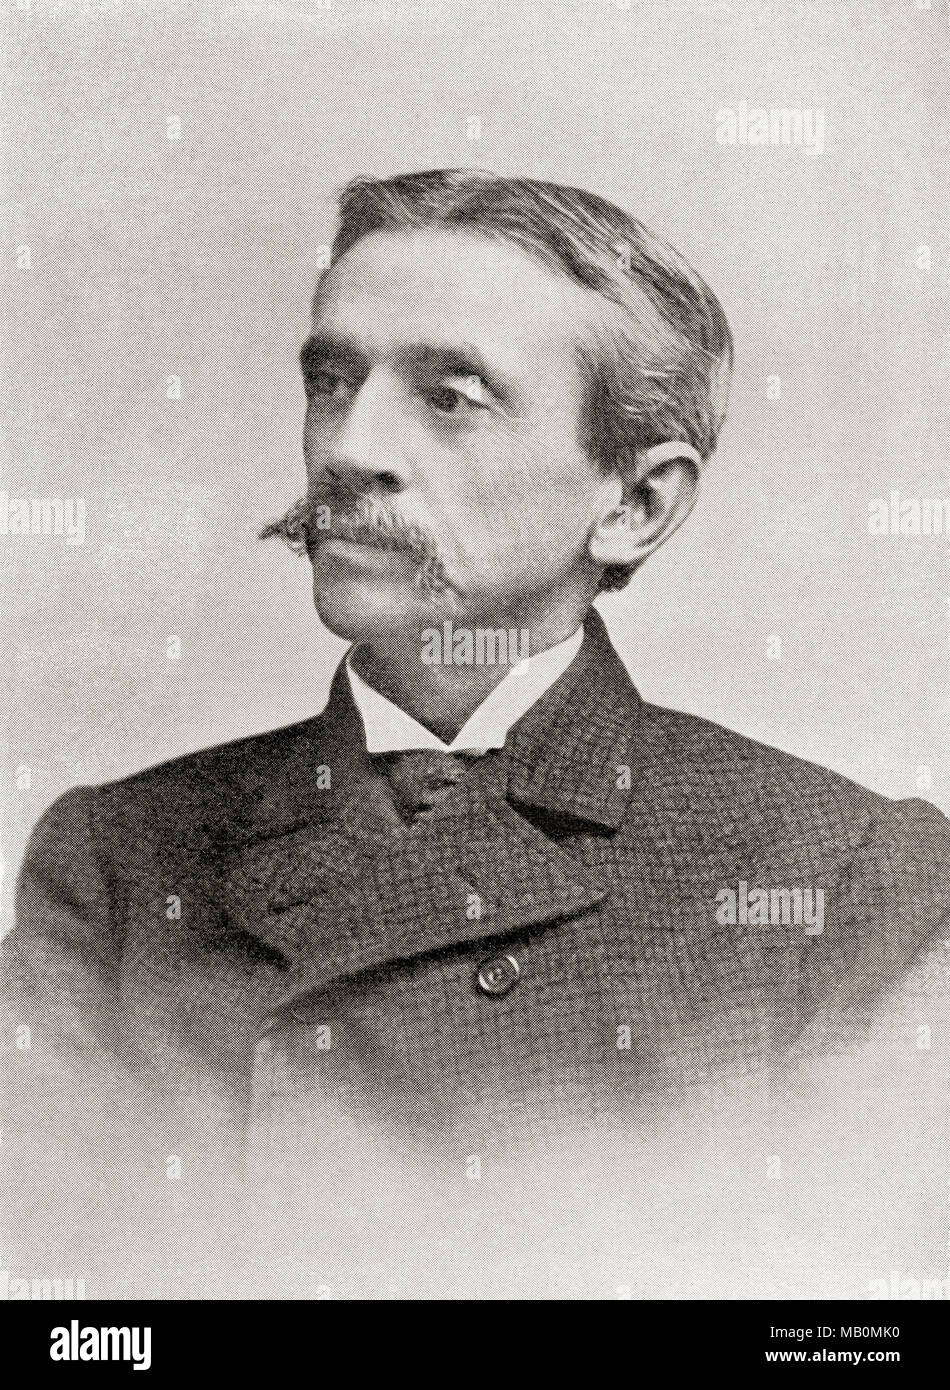 Frank Richard Stockton, 1834 – 1902.  American writer and humorist.  From The International Library of Famous Literature, published c. 1900 Stock Photo